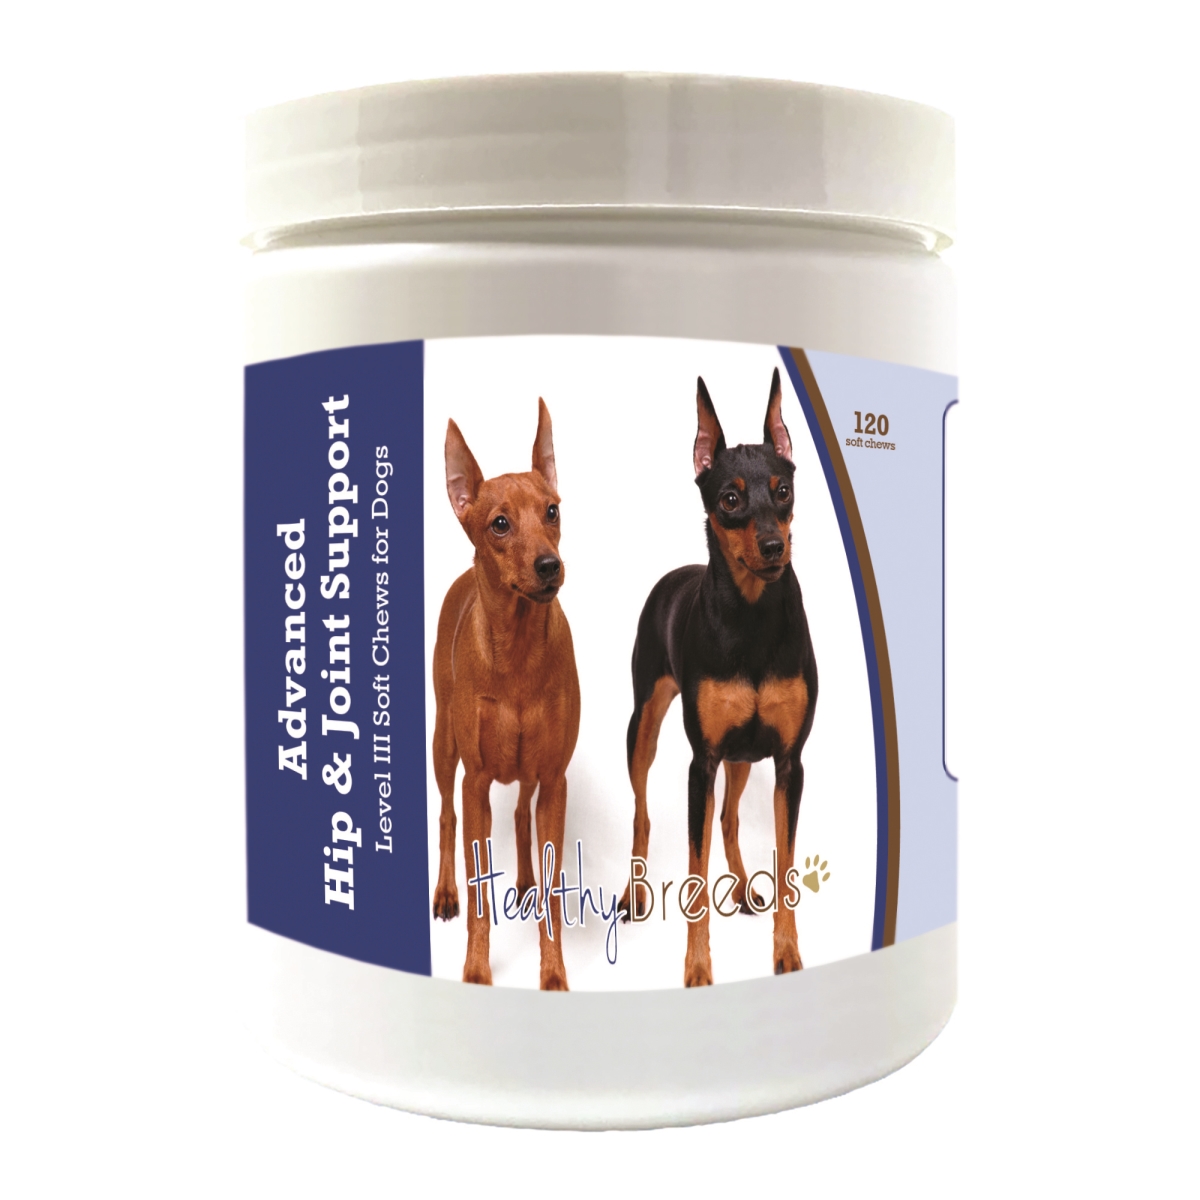 Picture of Healthy Breeds 192959898712 Miniature Pinscher Advanced Hip & Joint Support Level III Soft Chews for Dogs